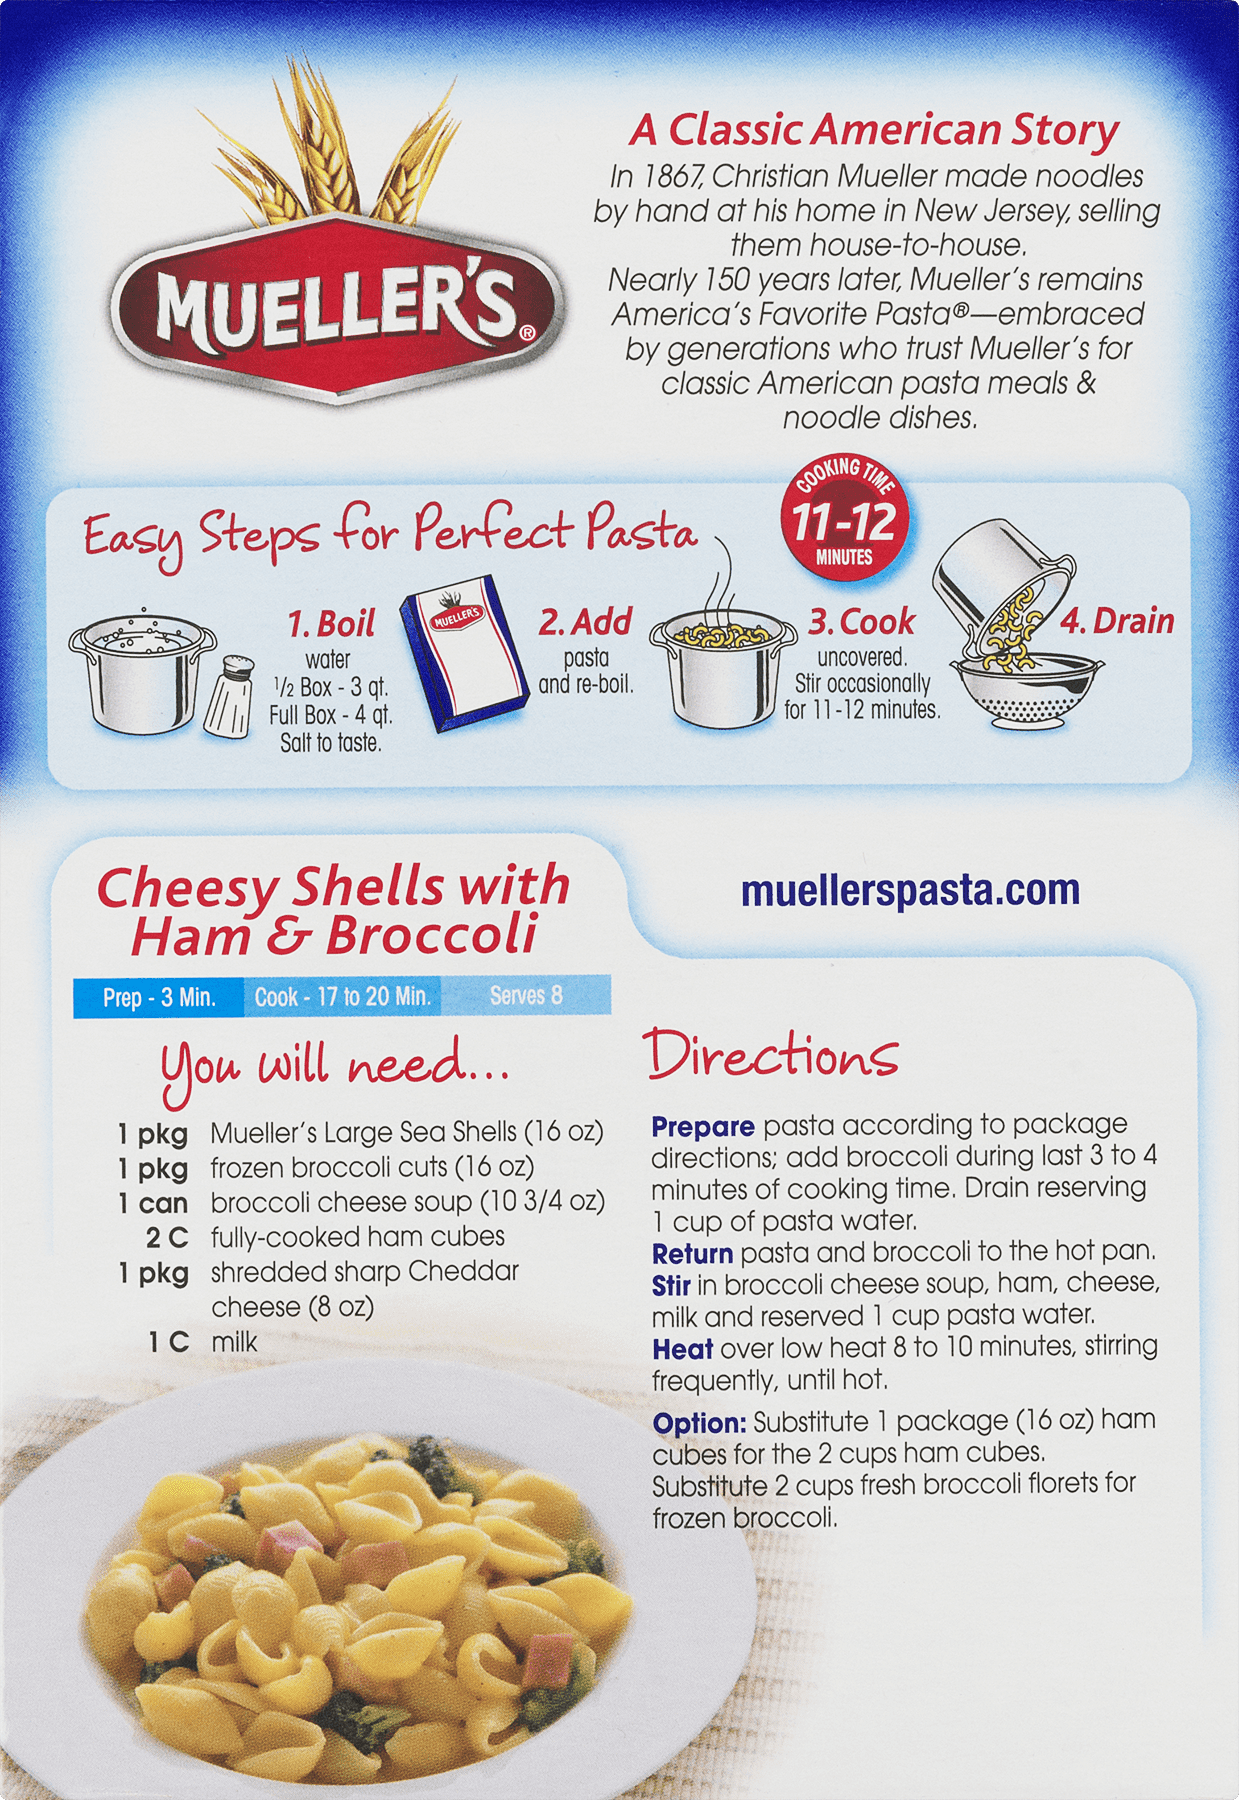 What are some Mueller's pasta recipes?